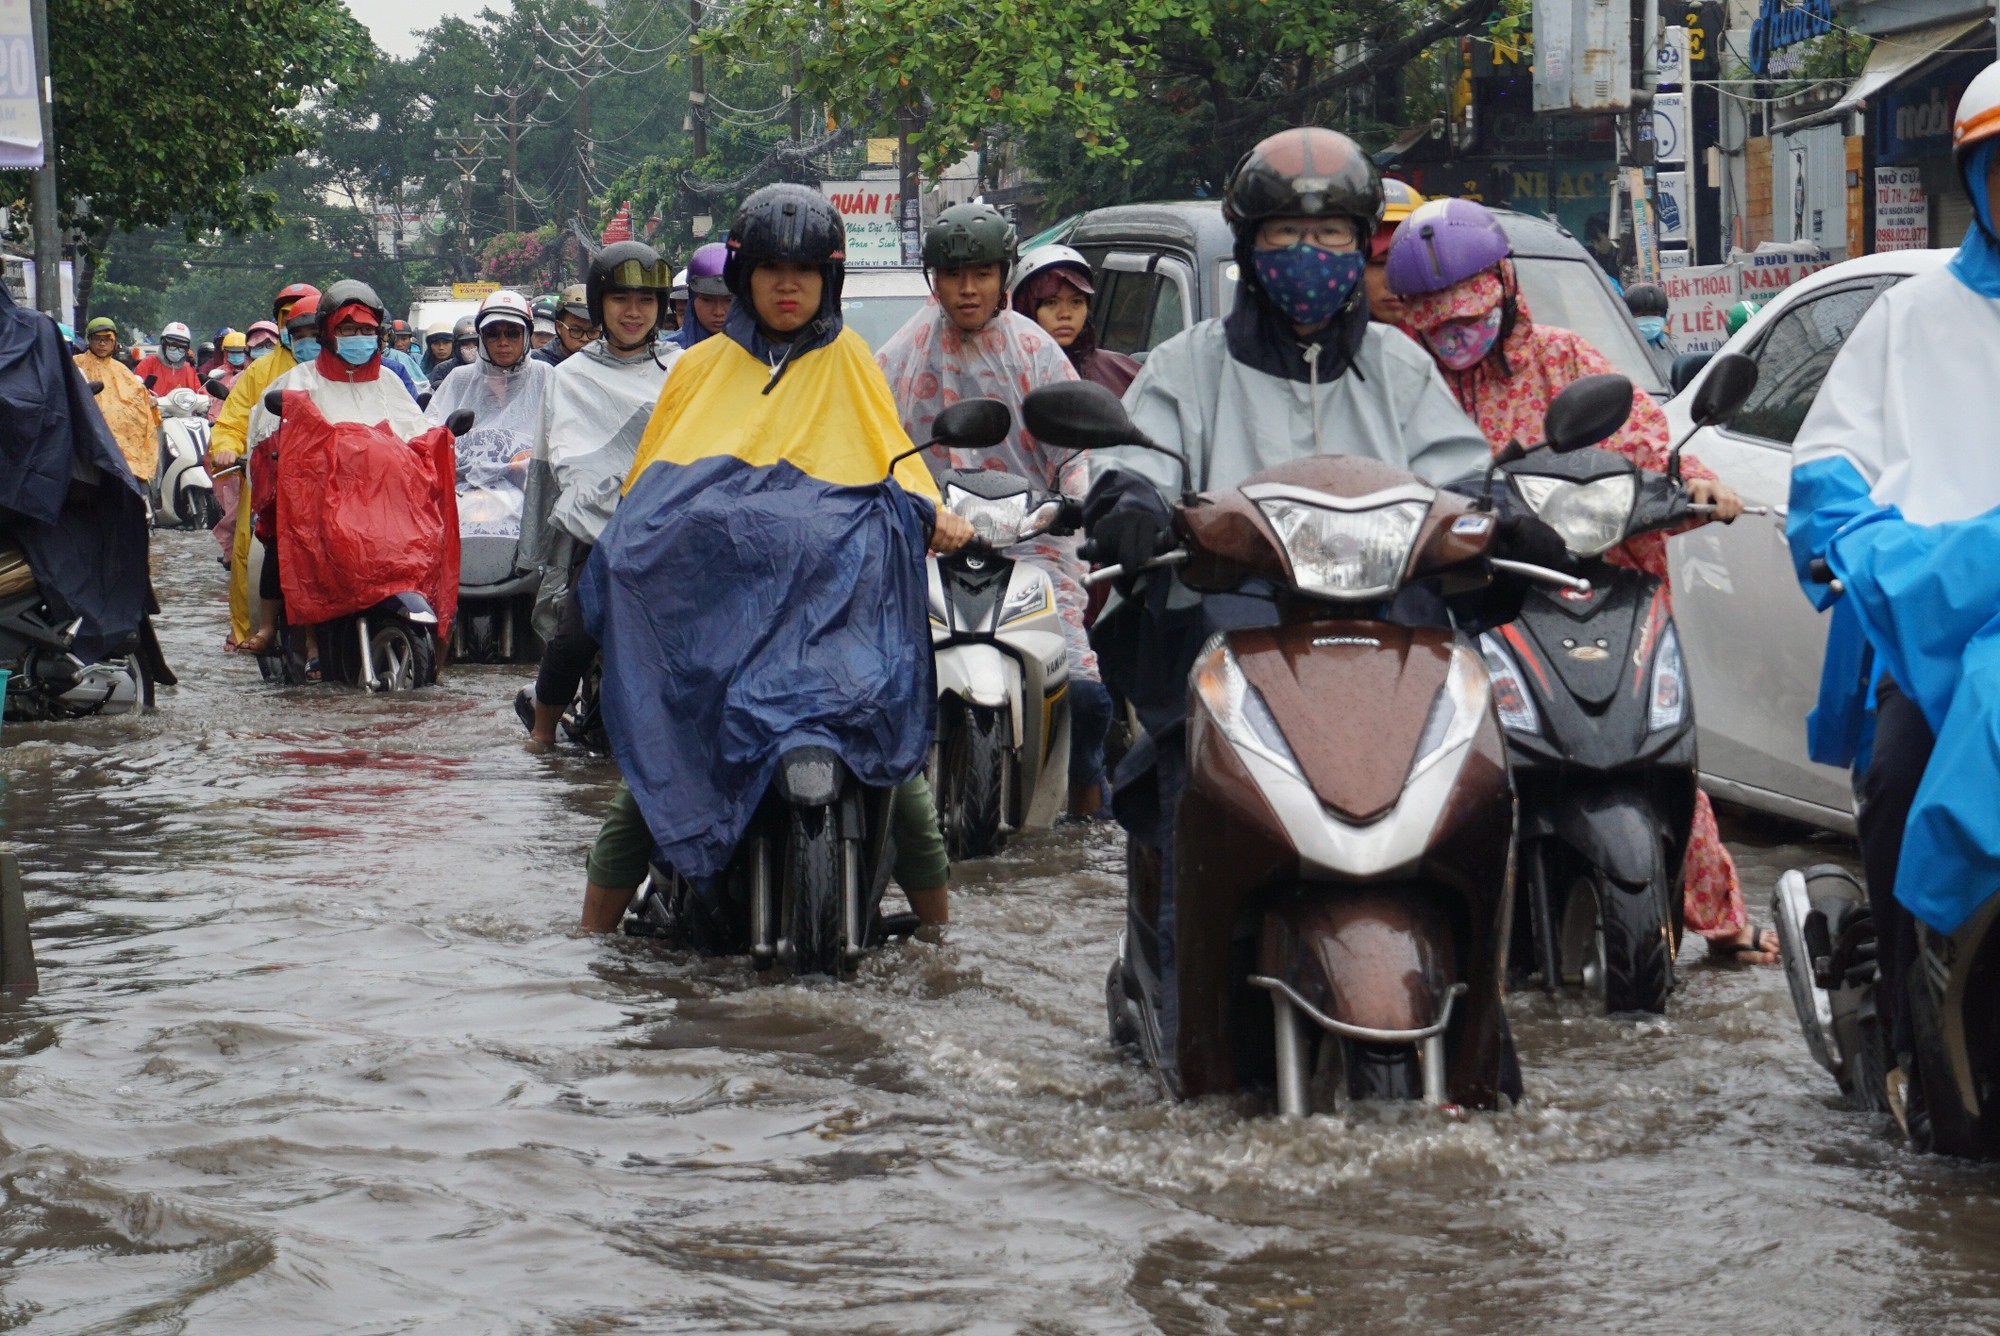 People are seen on a flooded street in Ho Chi Minh City. Photo: Tuoi Tre